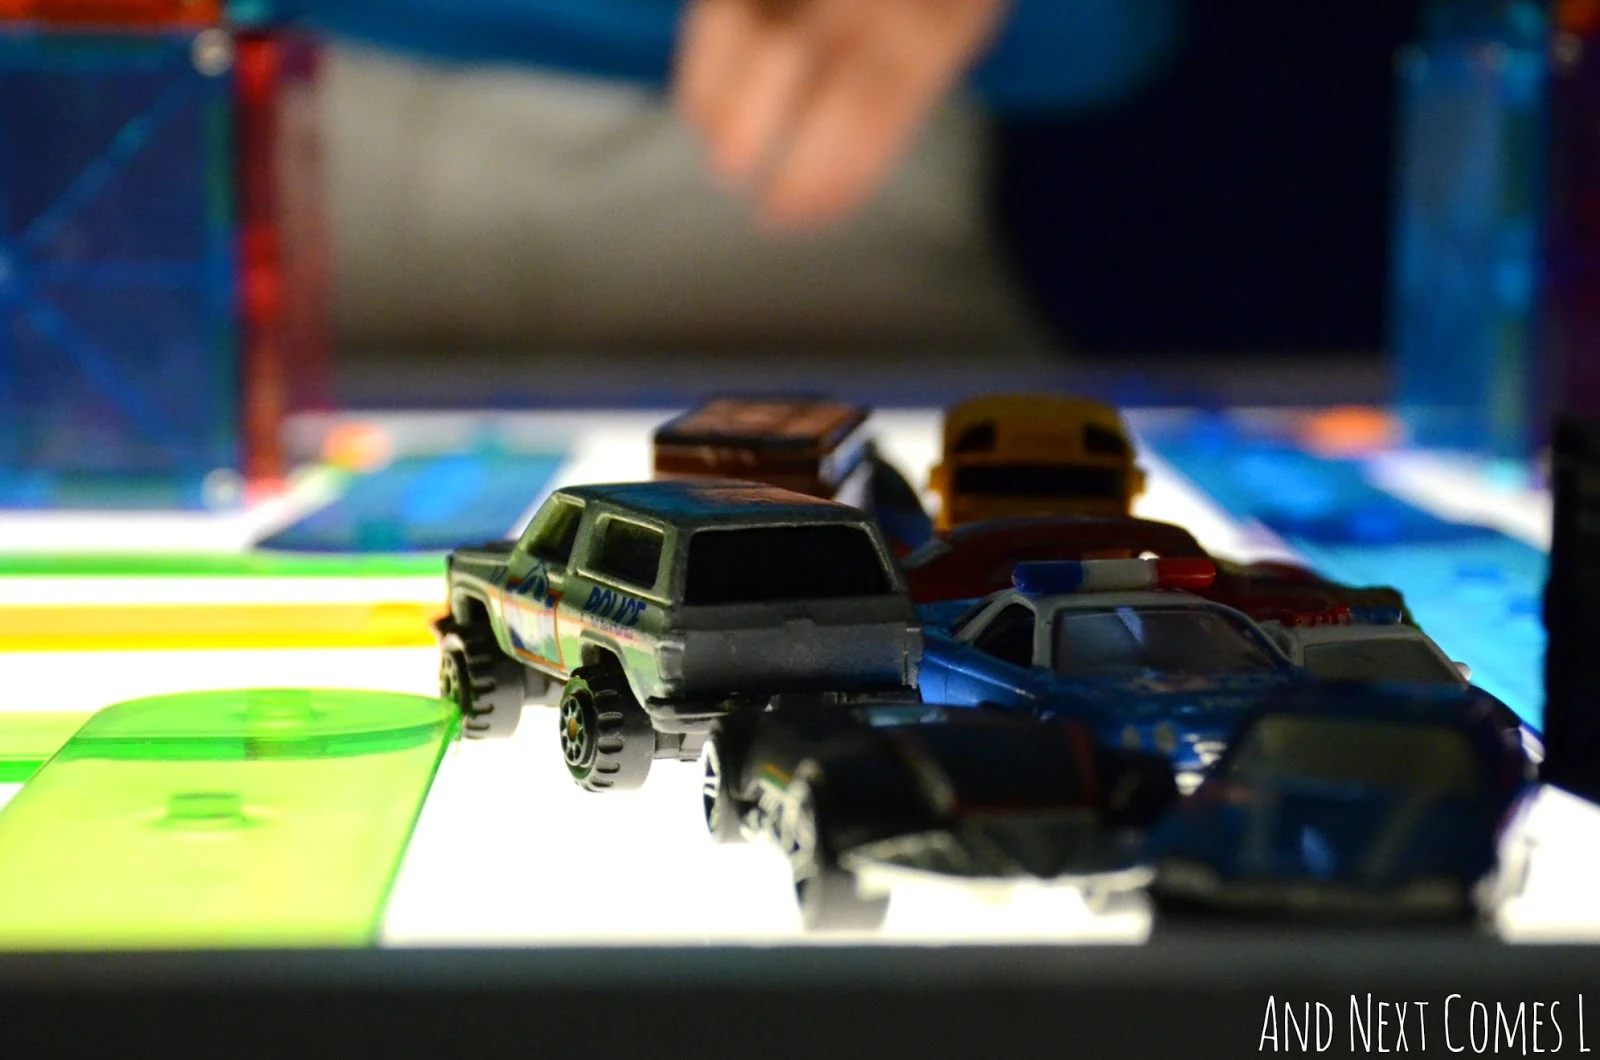 Playing with cars on the light table from And Next Comes L